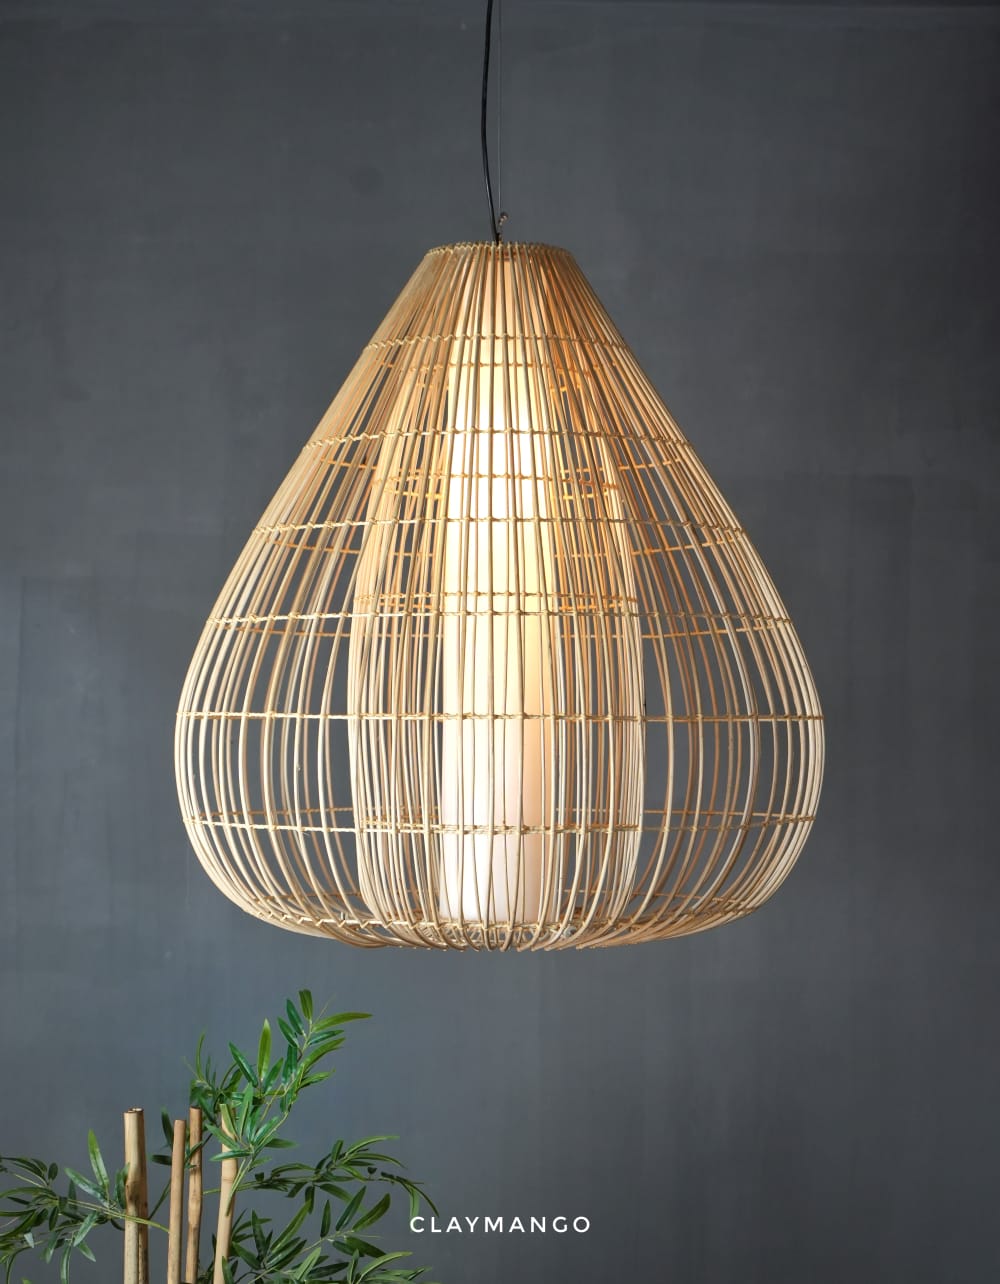 Lumos : Unique handmade Woven Hanging Pendant Light, Natural/Cane Pendant Light for Home restaurants and offices.